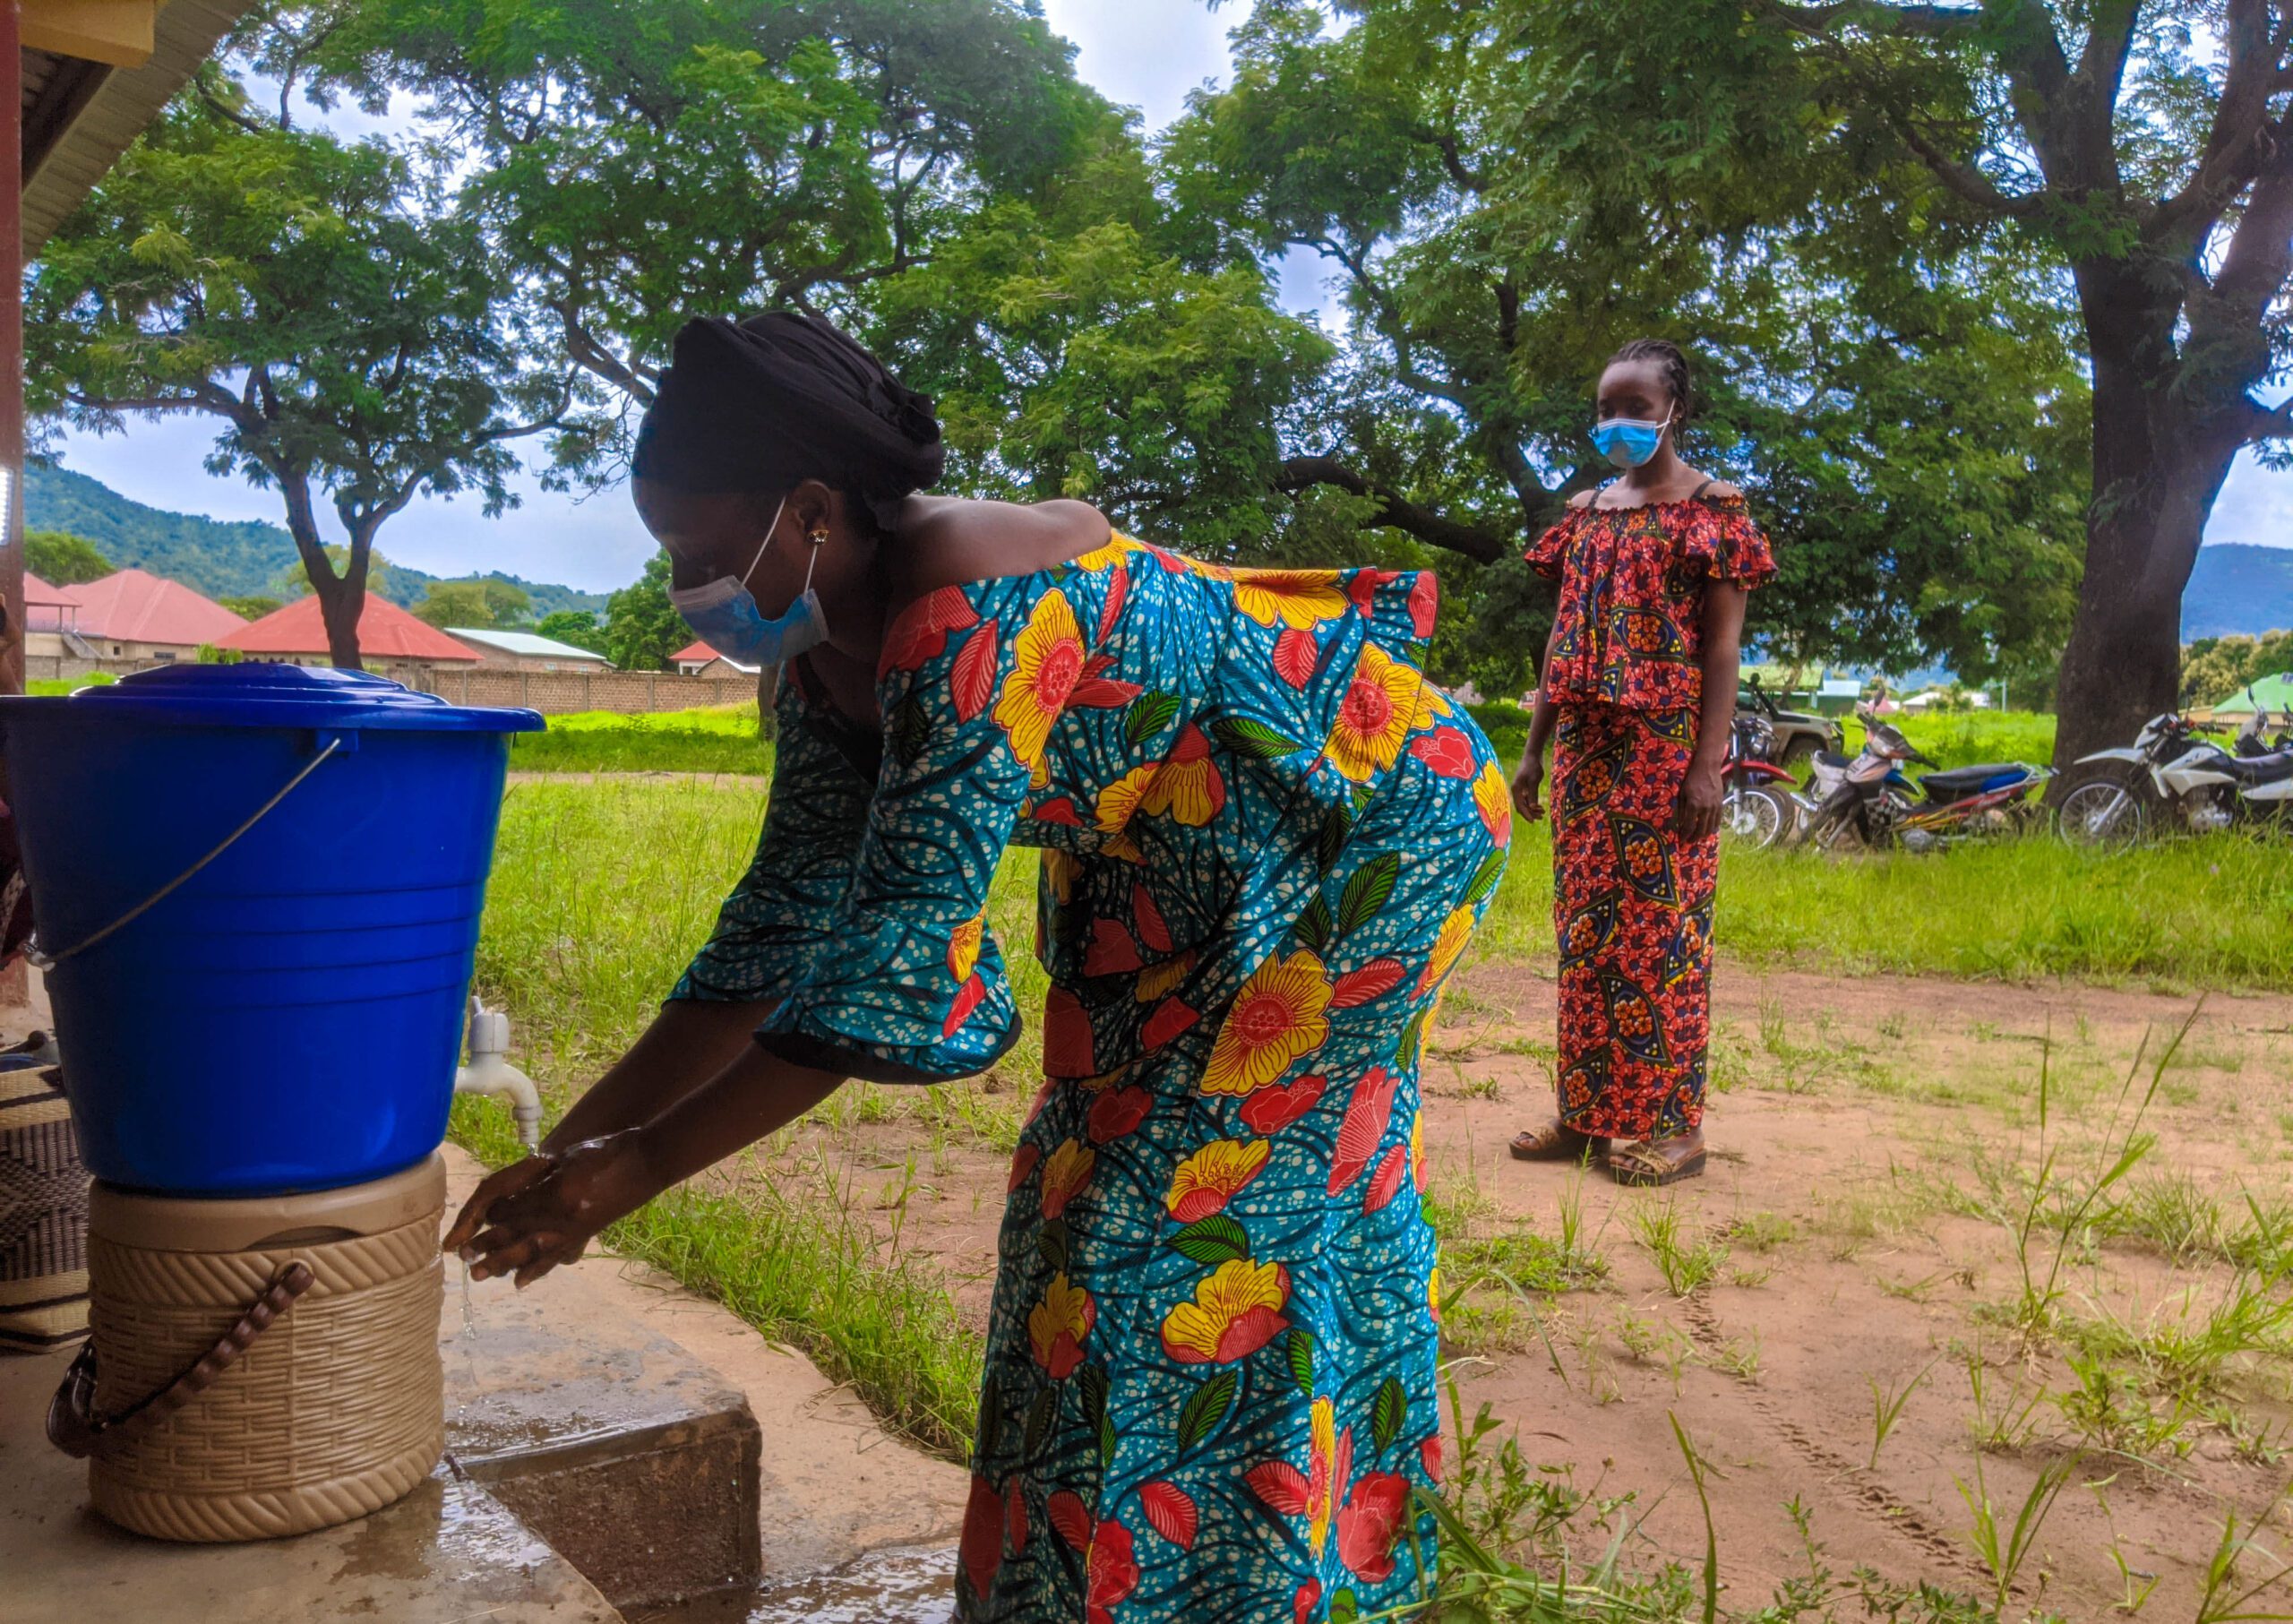 A woman washes her hands using a spout from a small bucket of water.